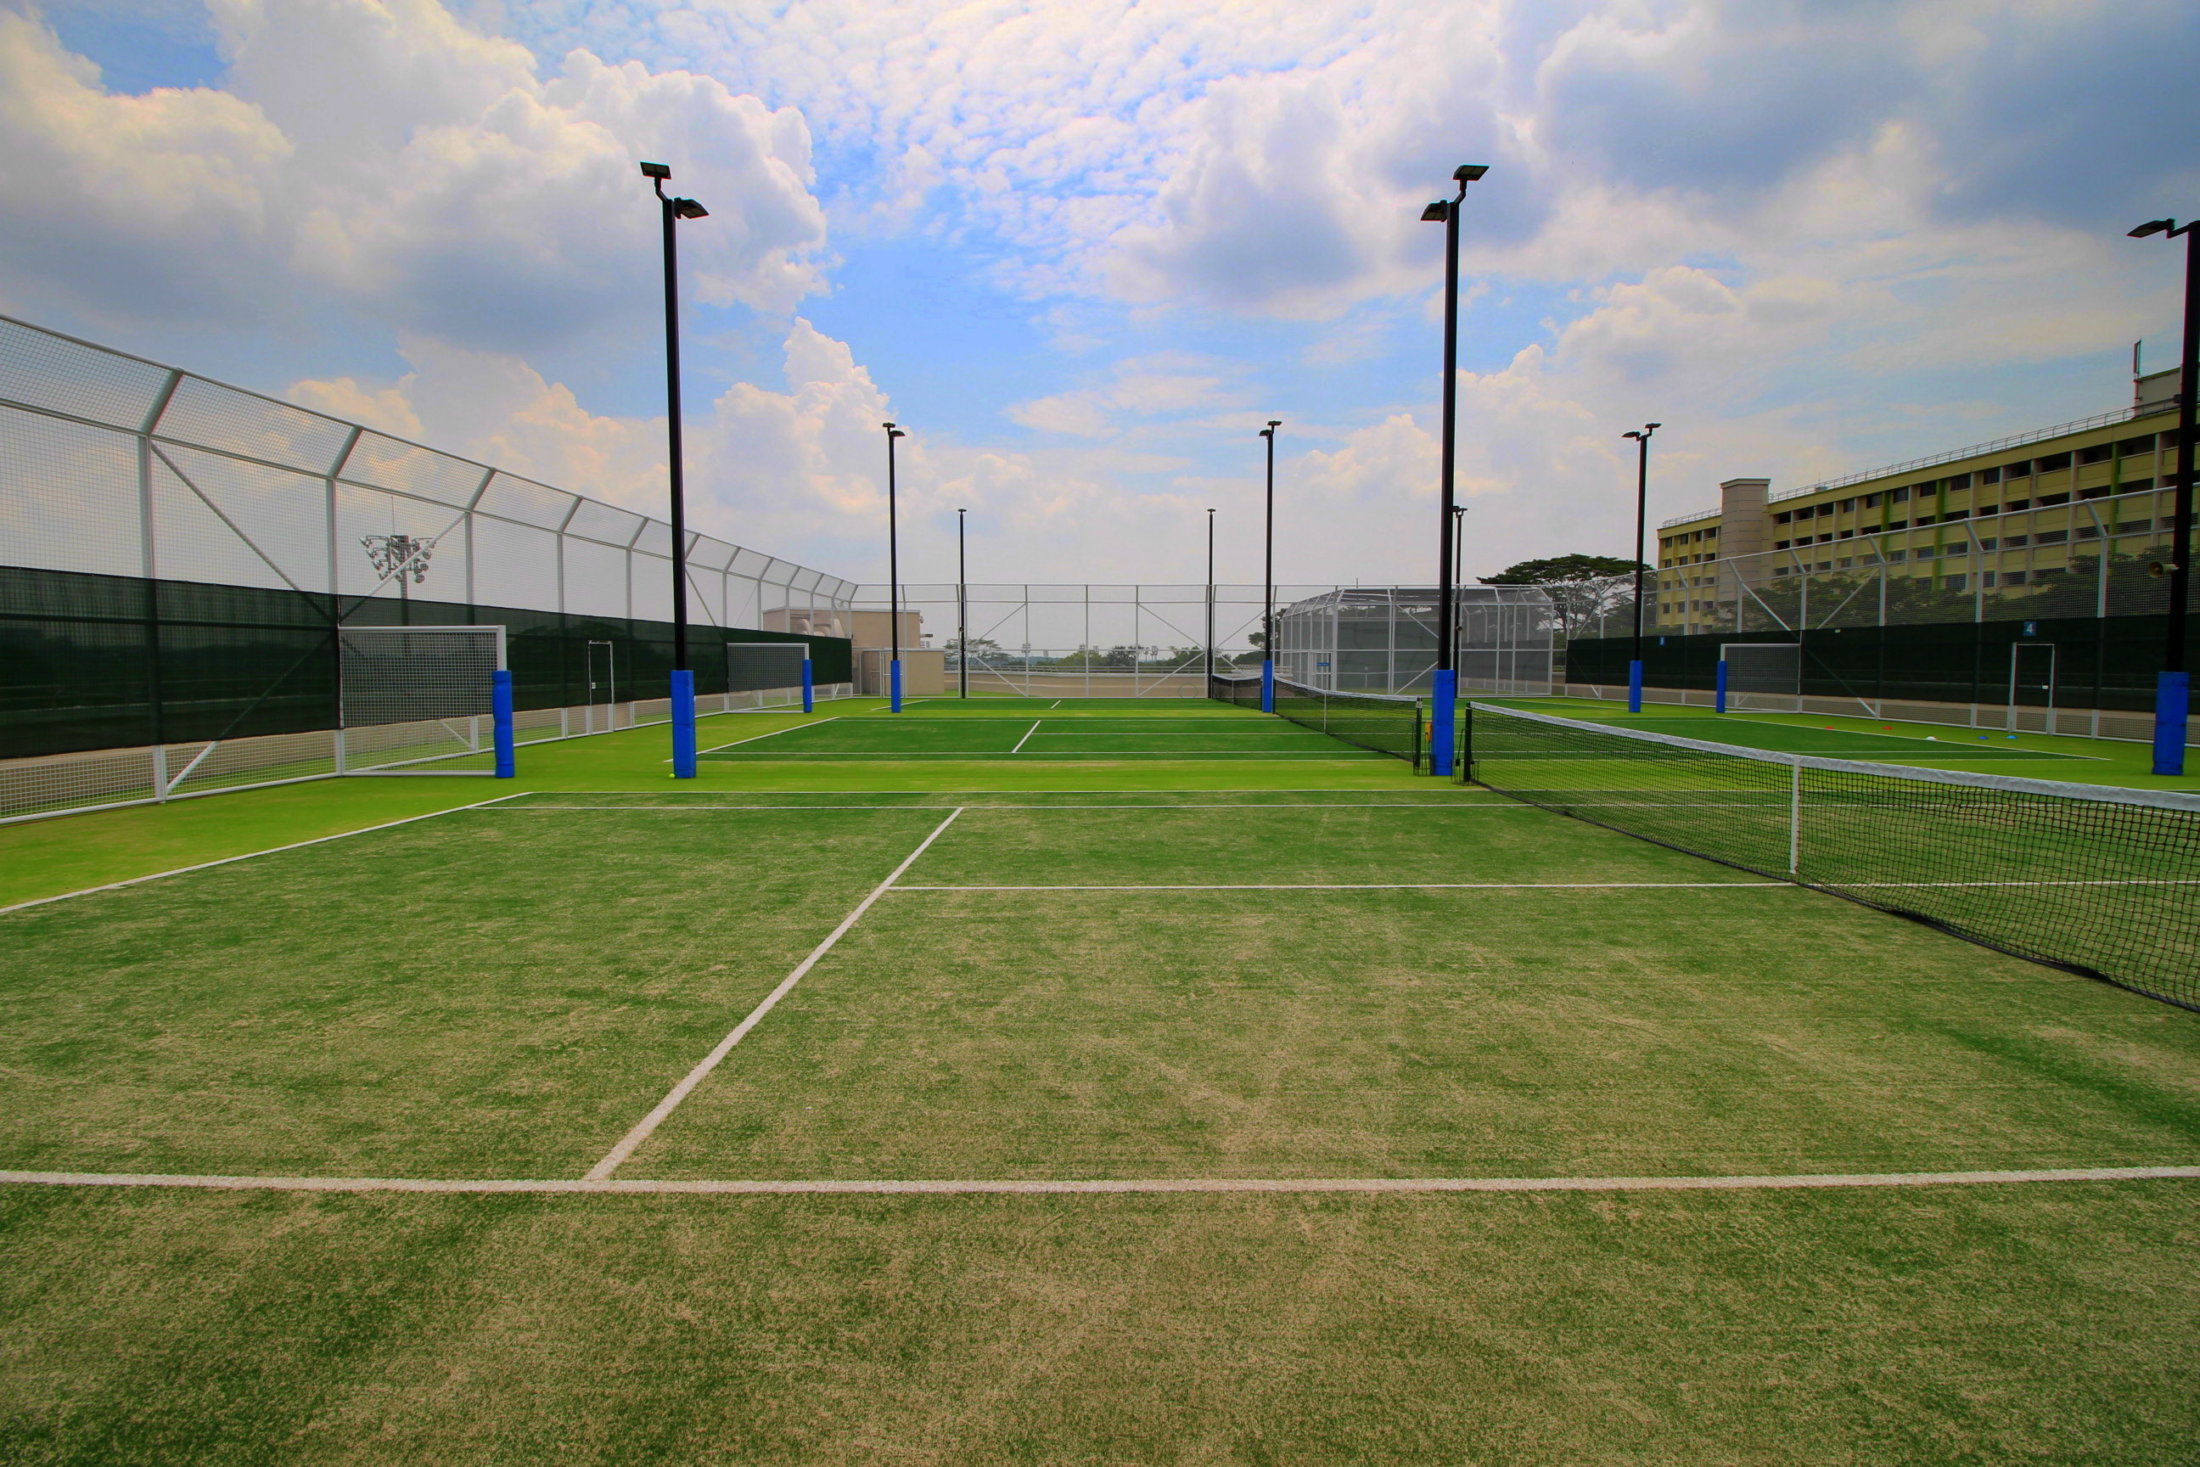 October - Tennis Courts (Artificial Turf)